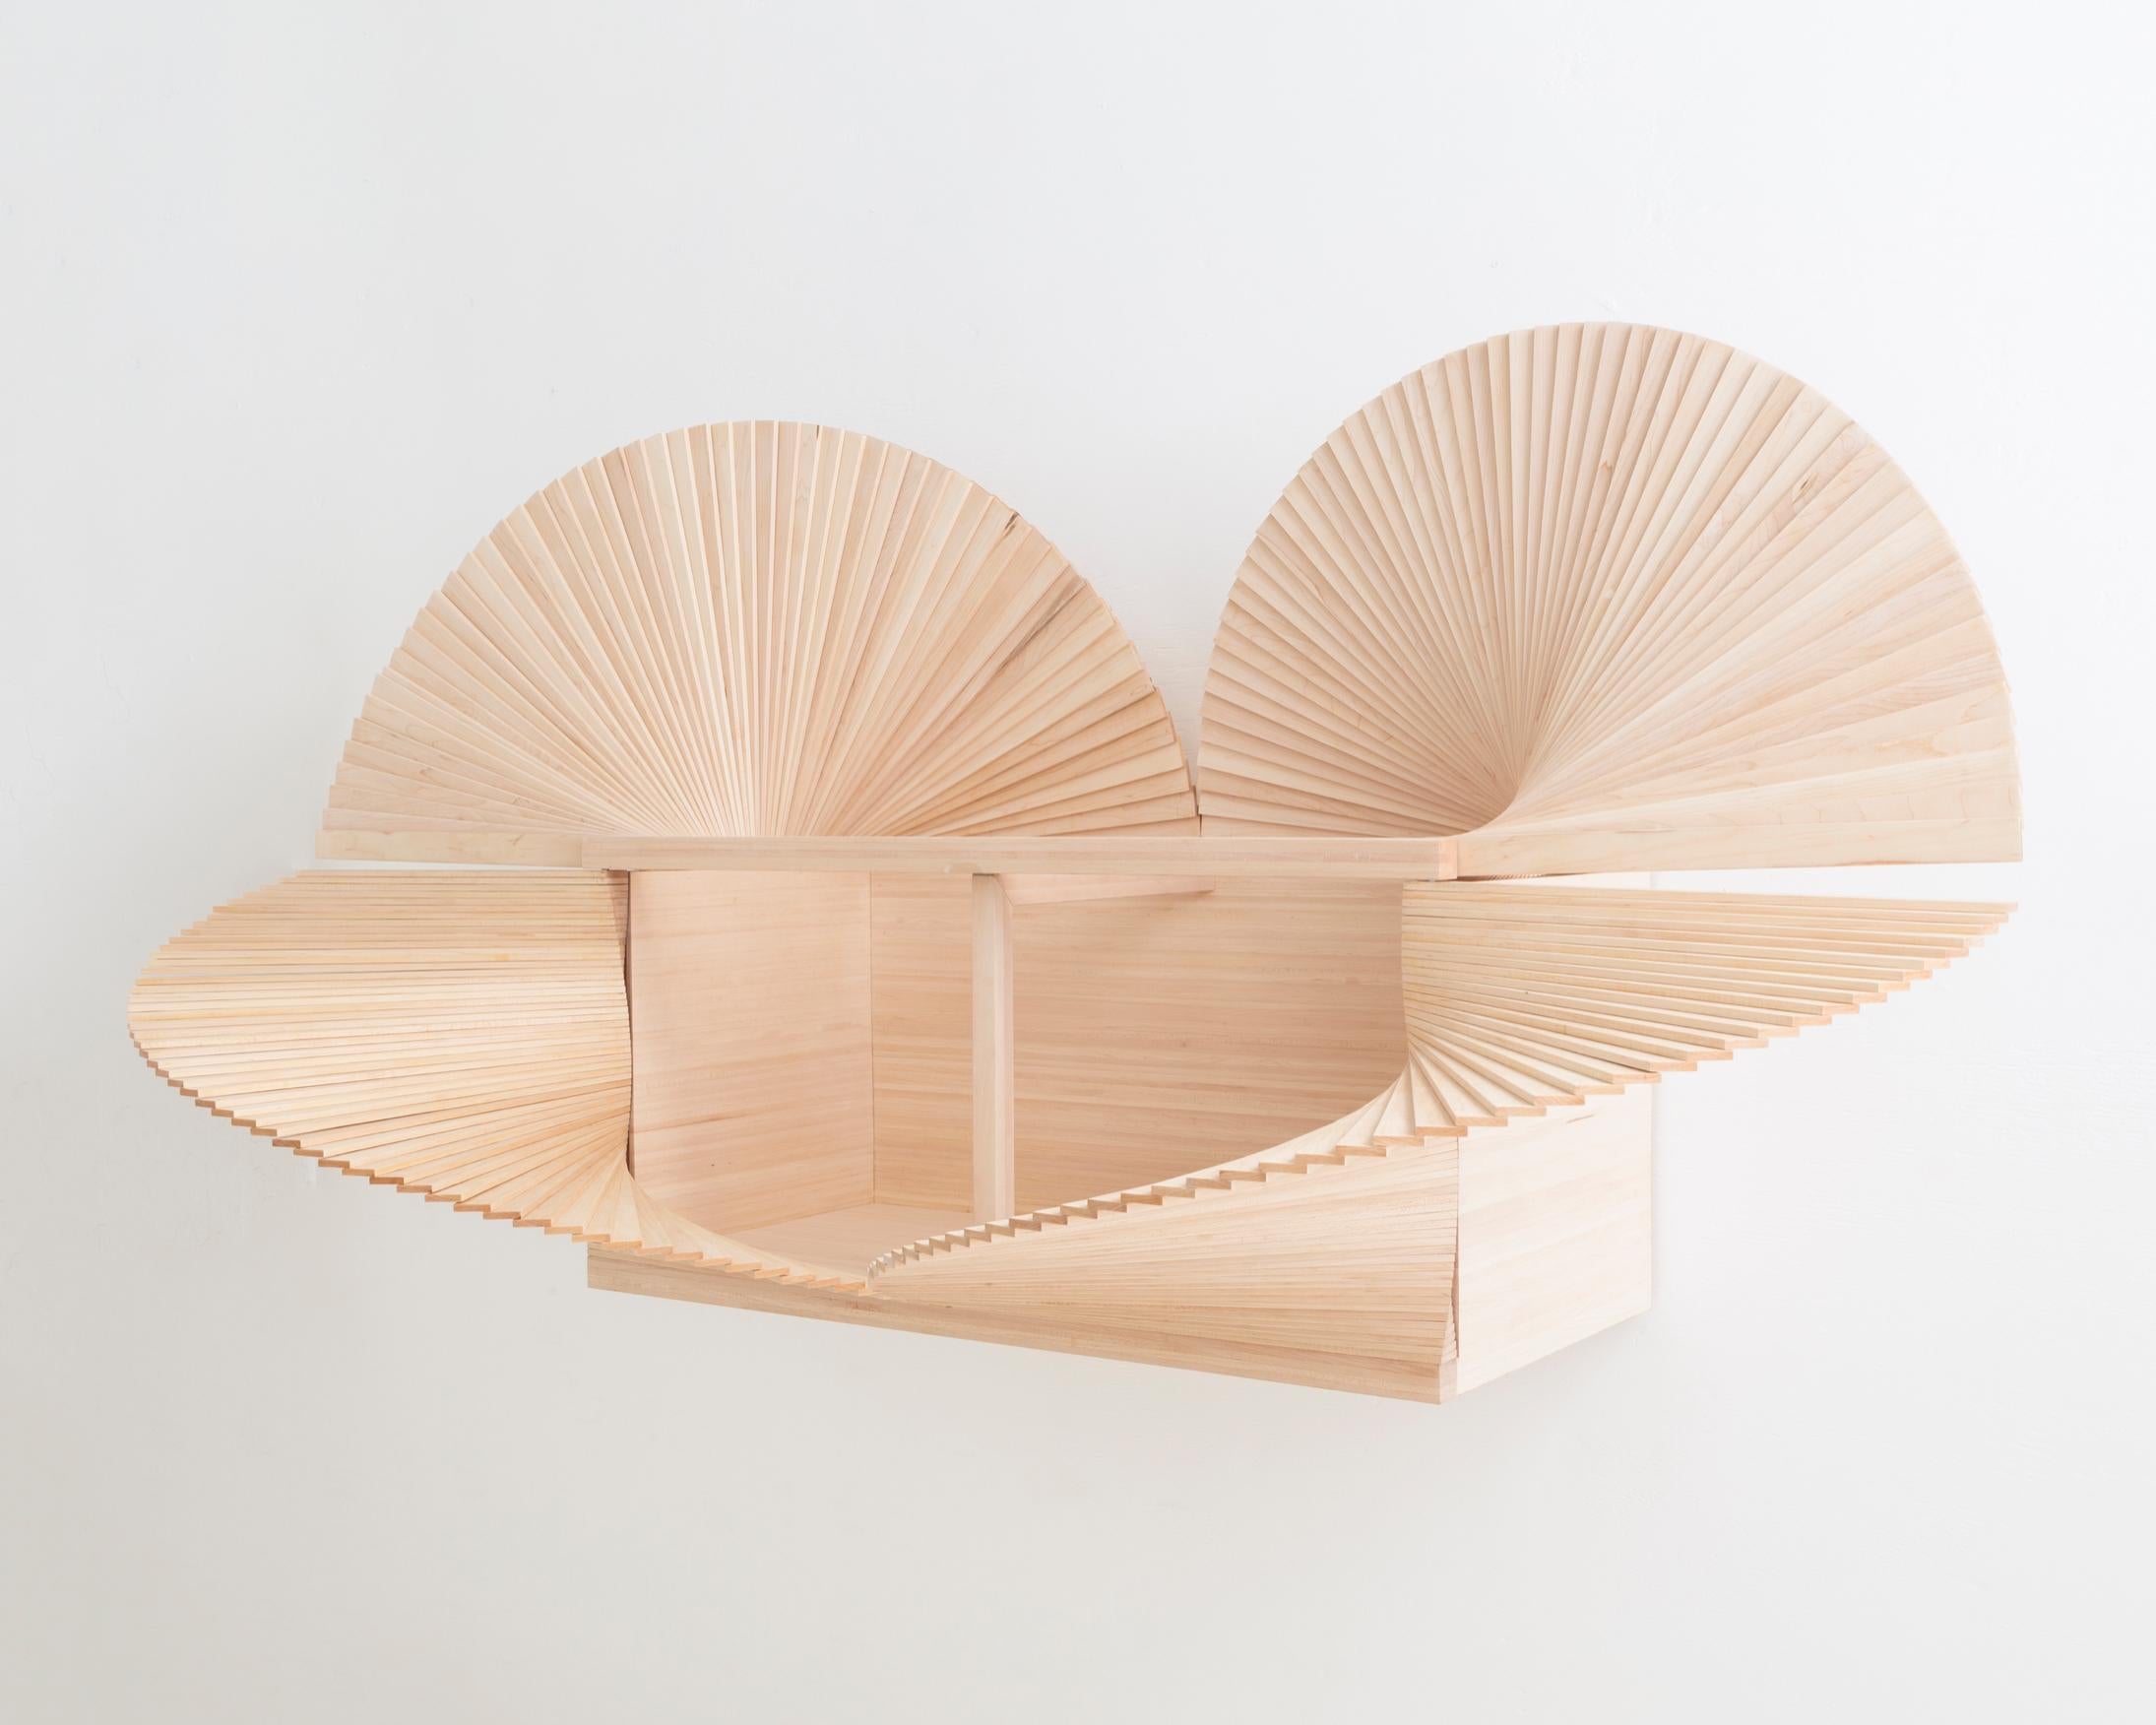 Contemporary Fan Cabinet in Wood and Metal Elements by Sebastian ErraZuriz, 2018 For Sale